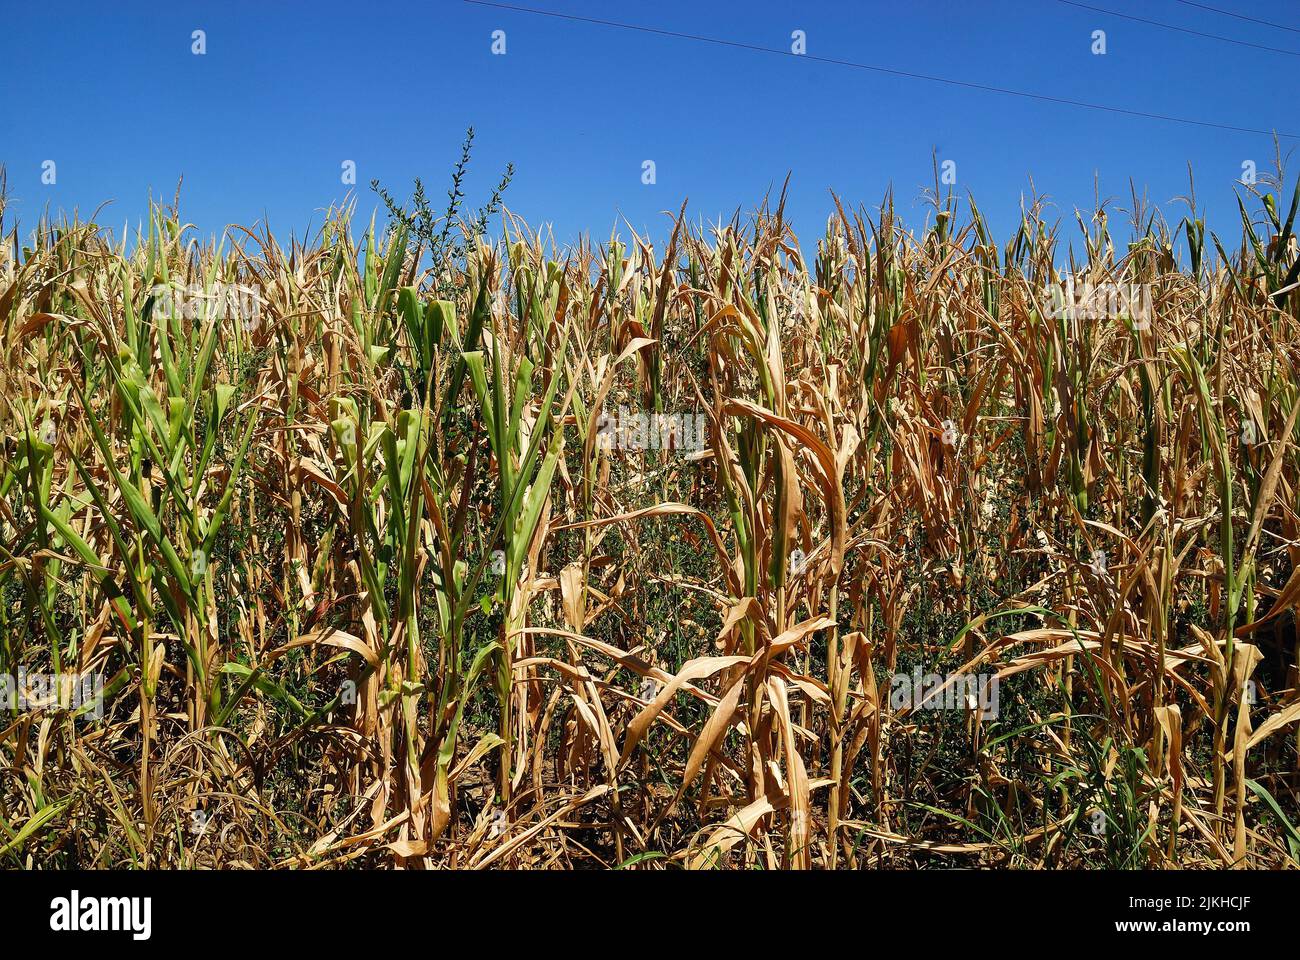 Veneto countryside, The drought affecting Northern Italy shows no sign of abating. After 200 days without rain and a winter without snow, the level of the rivers is at an all-time low. Serious damage to agriculture, two thirds of the maize crop was lost. Stock Photo